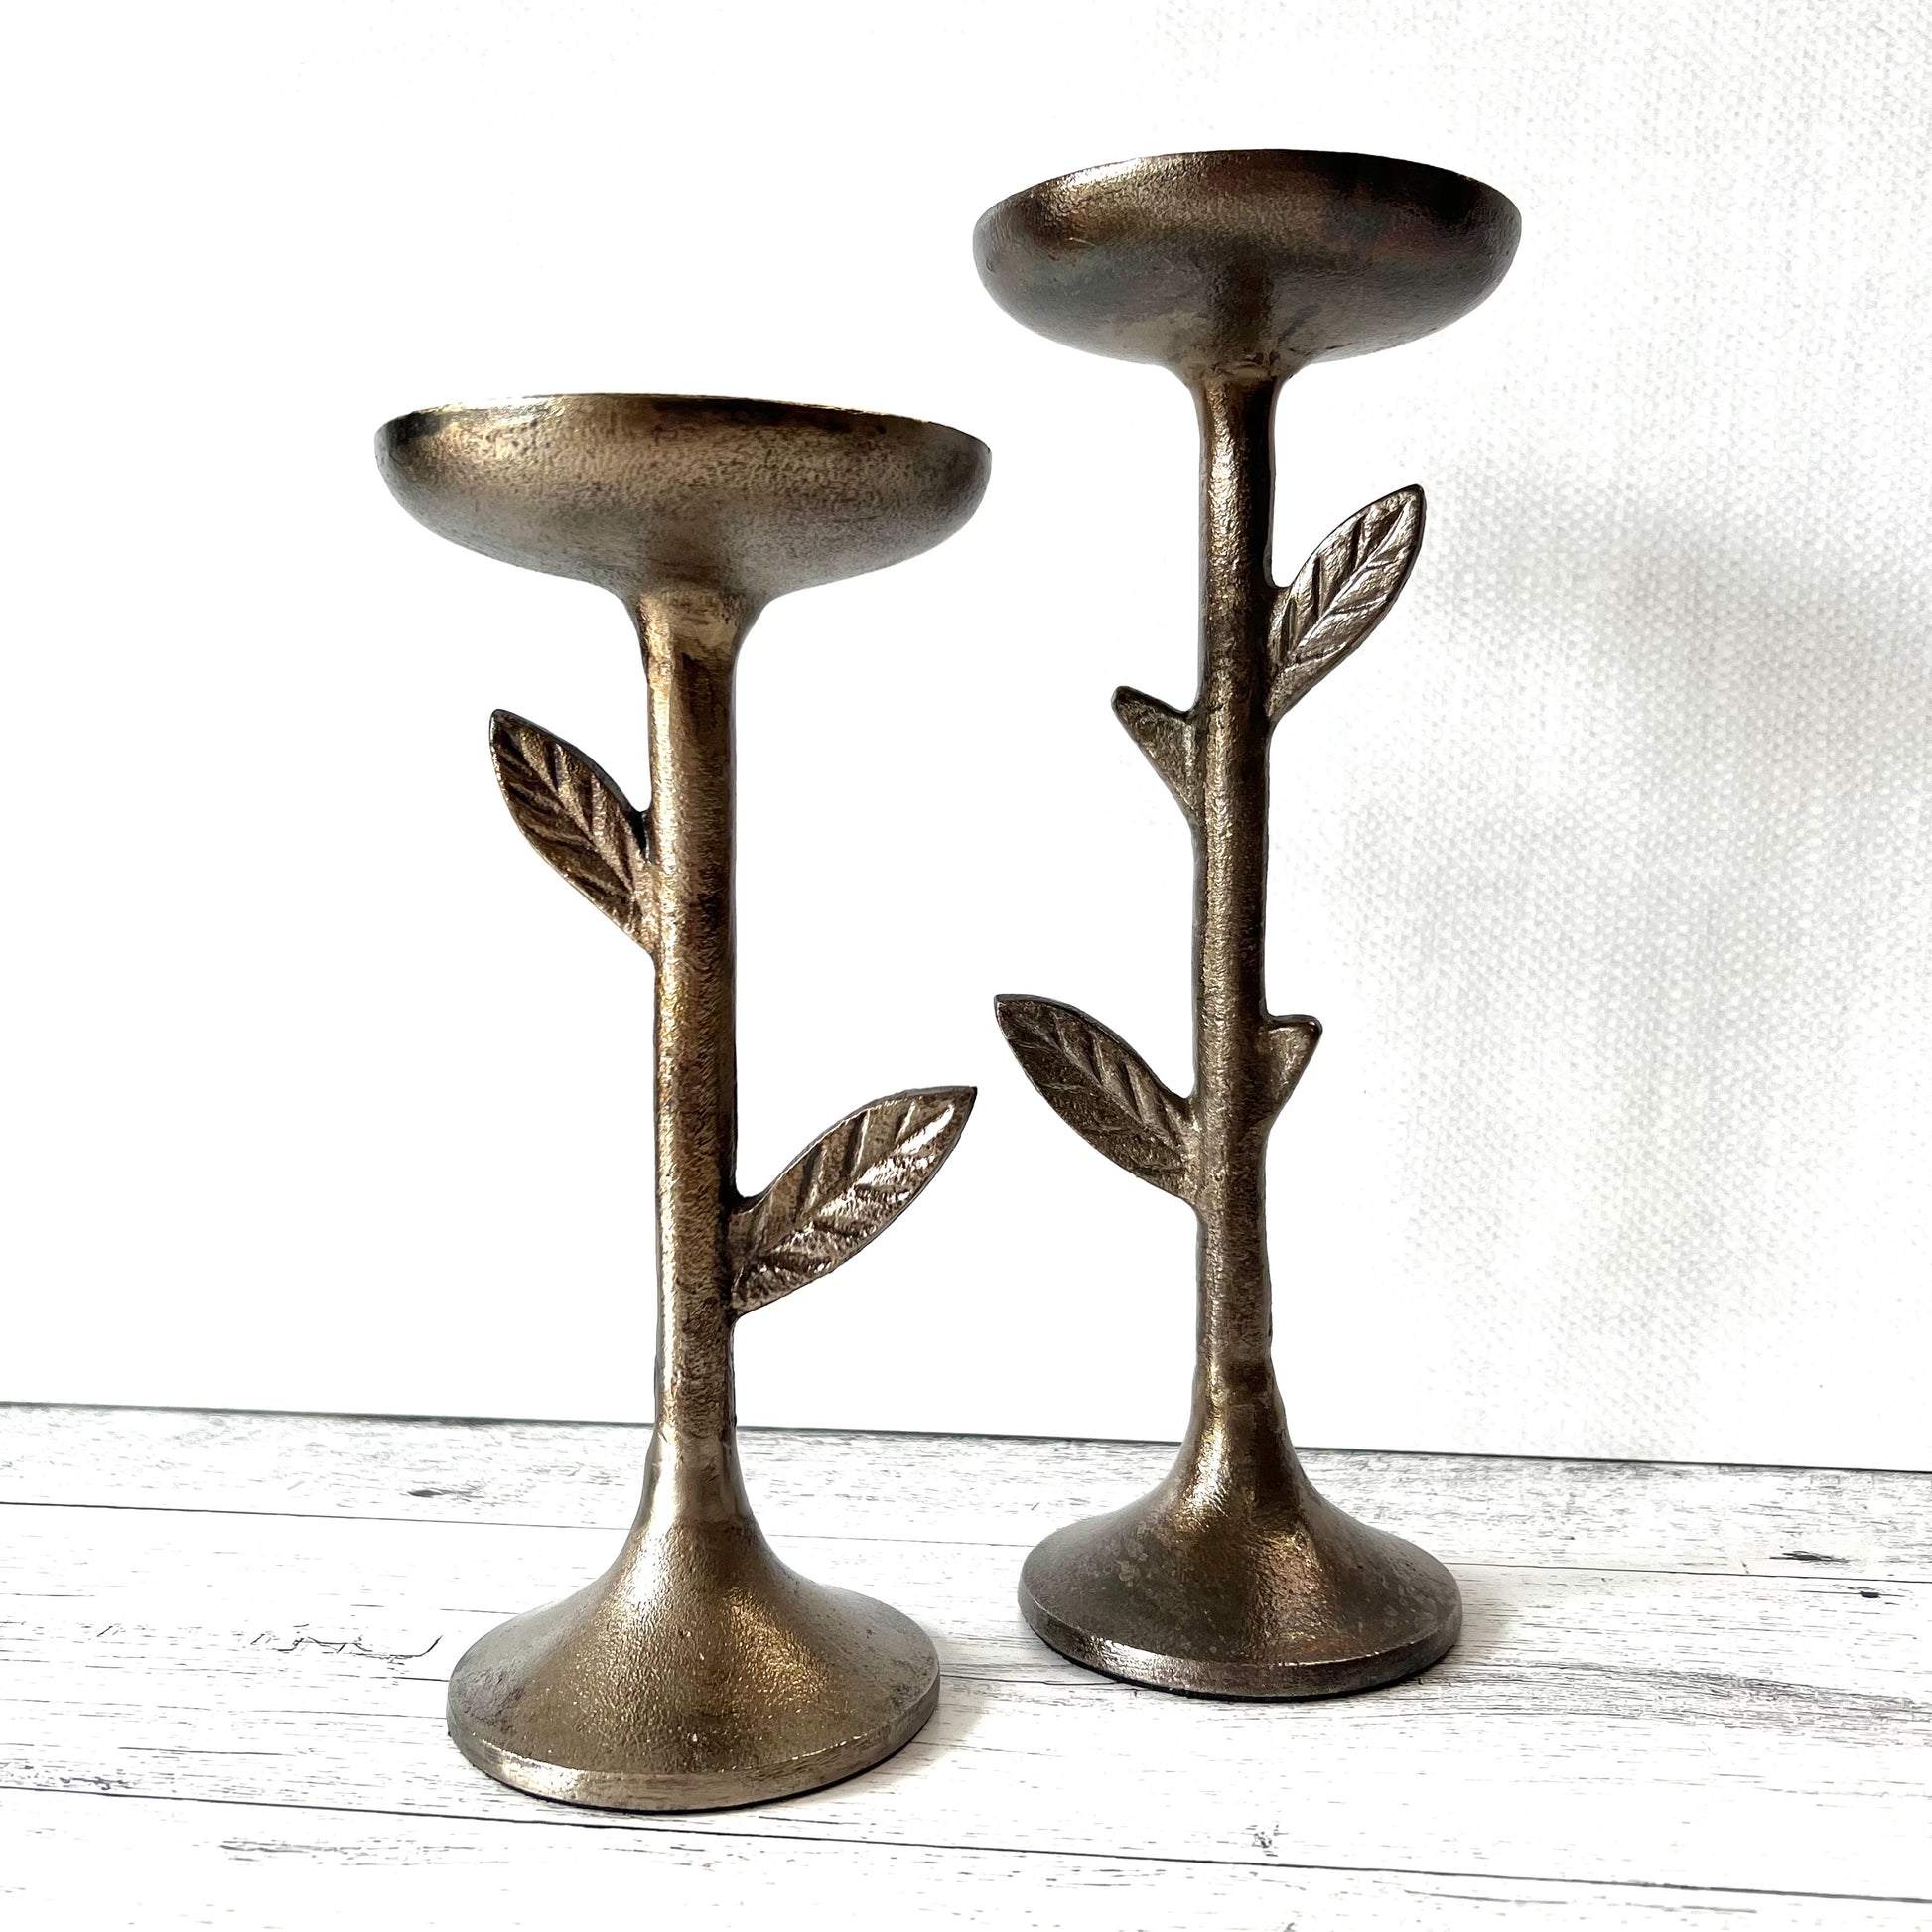 2 sizes of metal candle holders with leaves on the stems on a white background.